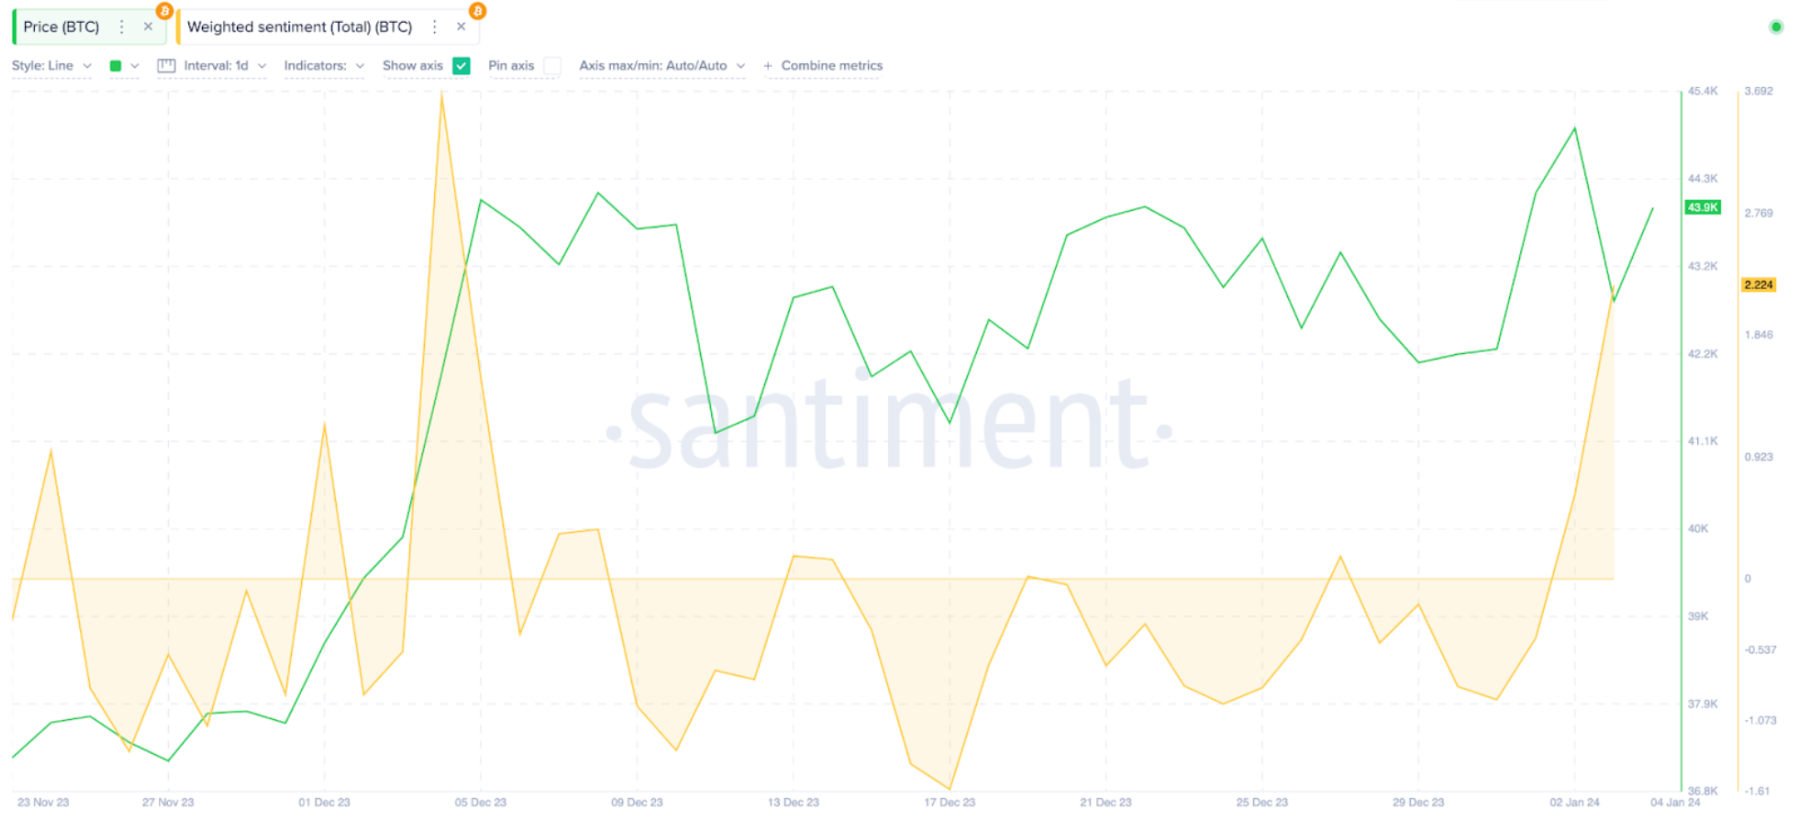 Bitcoin (BTC) Weighted-Sentiment vs. Price | Source: Santiment